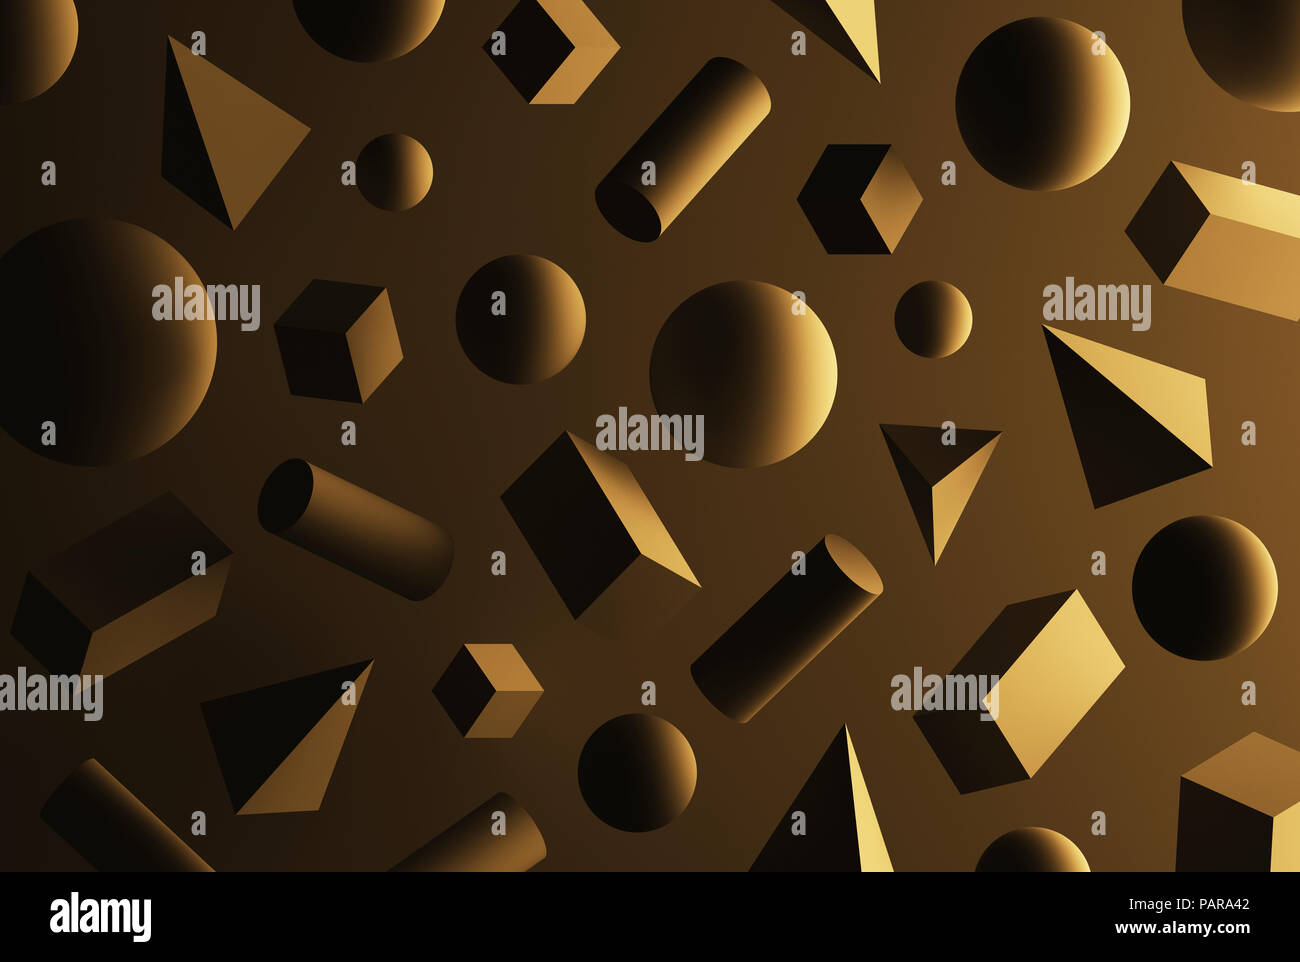 Cubes, pyramids, spheres and cuboids in front of brown background Stock Photo